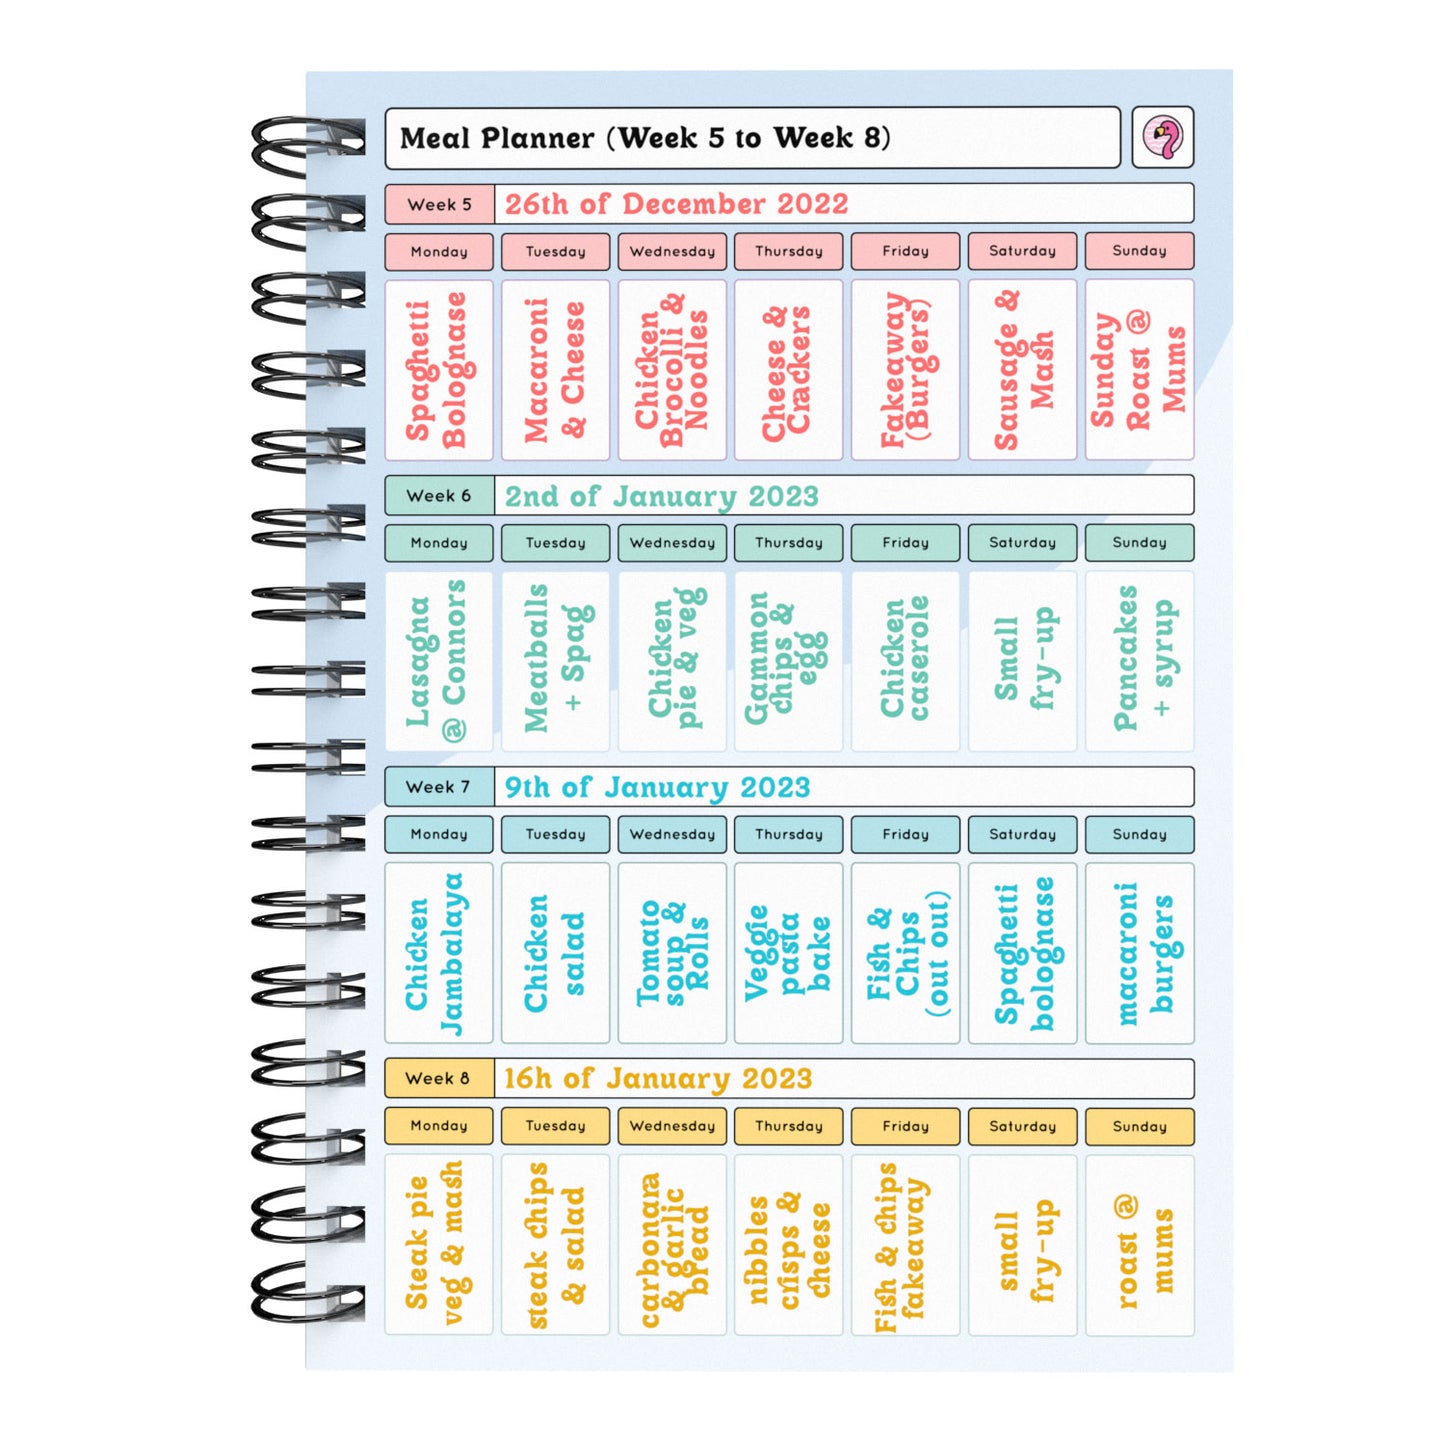 Food Diary - C44 - Calorie Counting